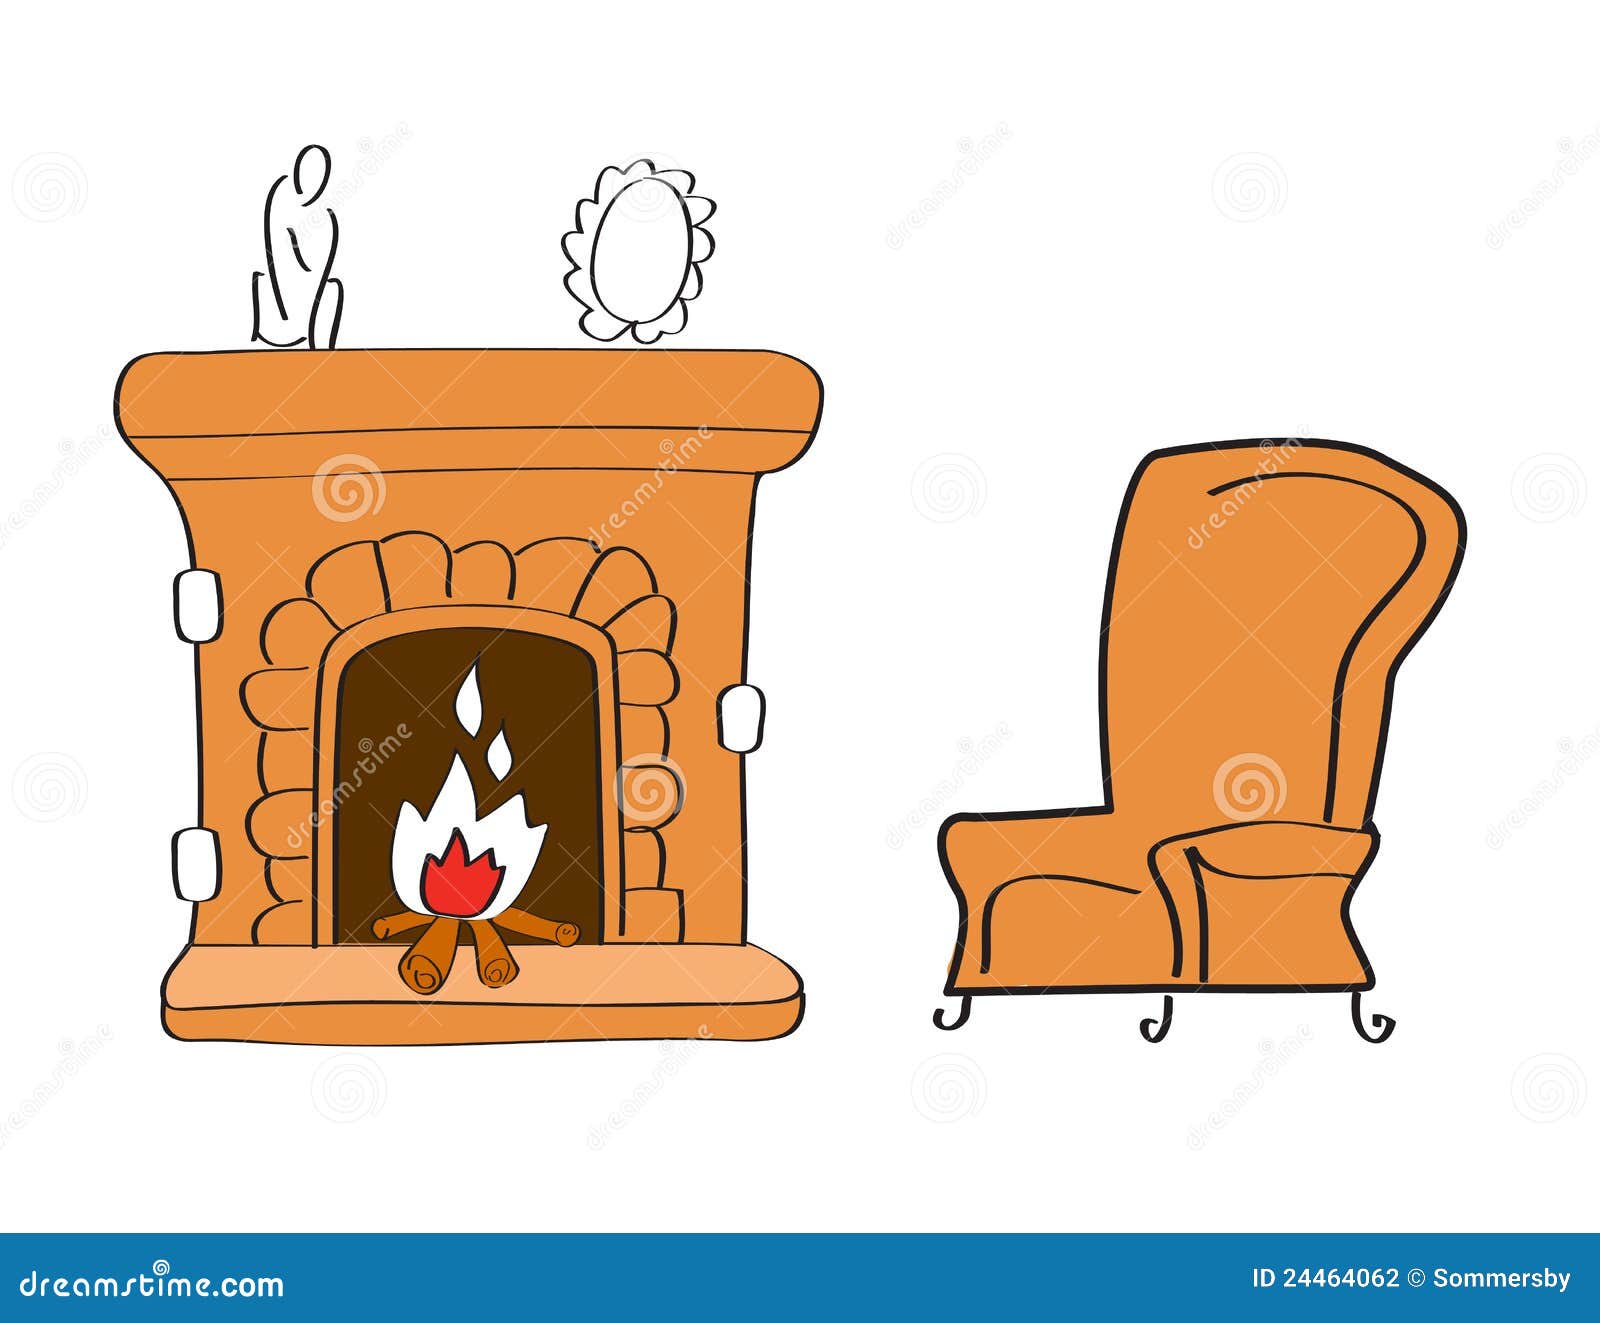 clipart fireplace - photo #33